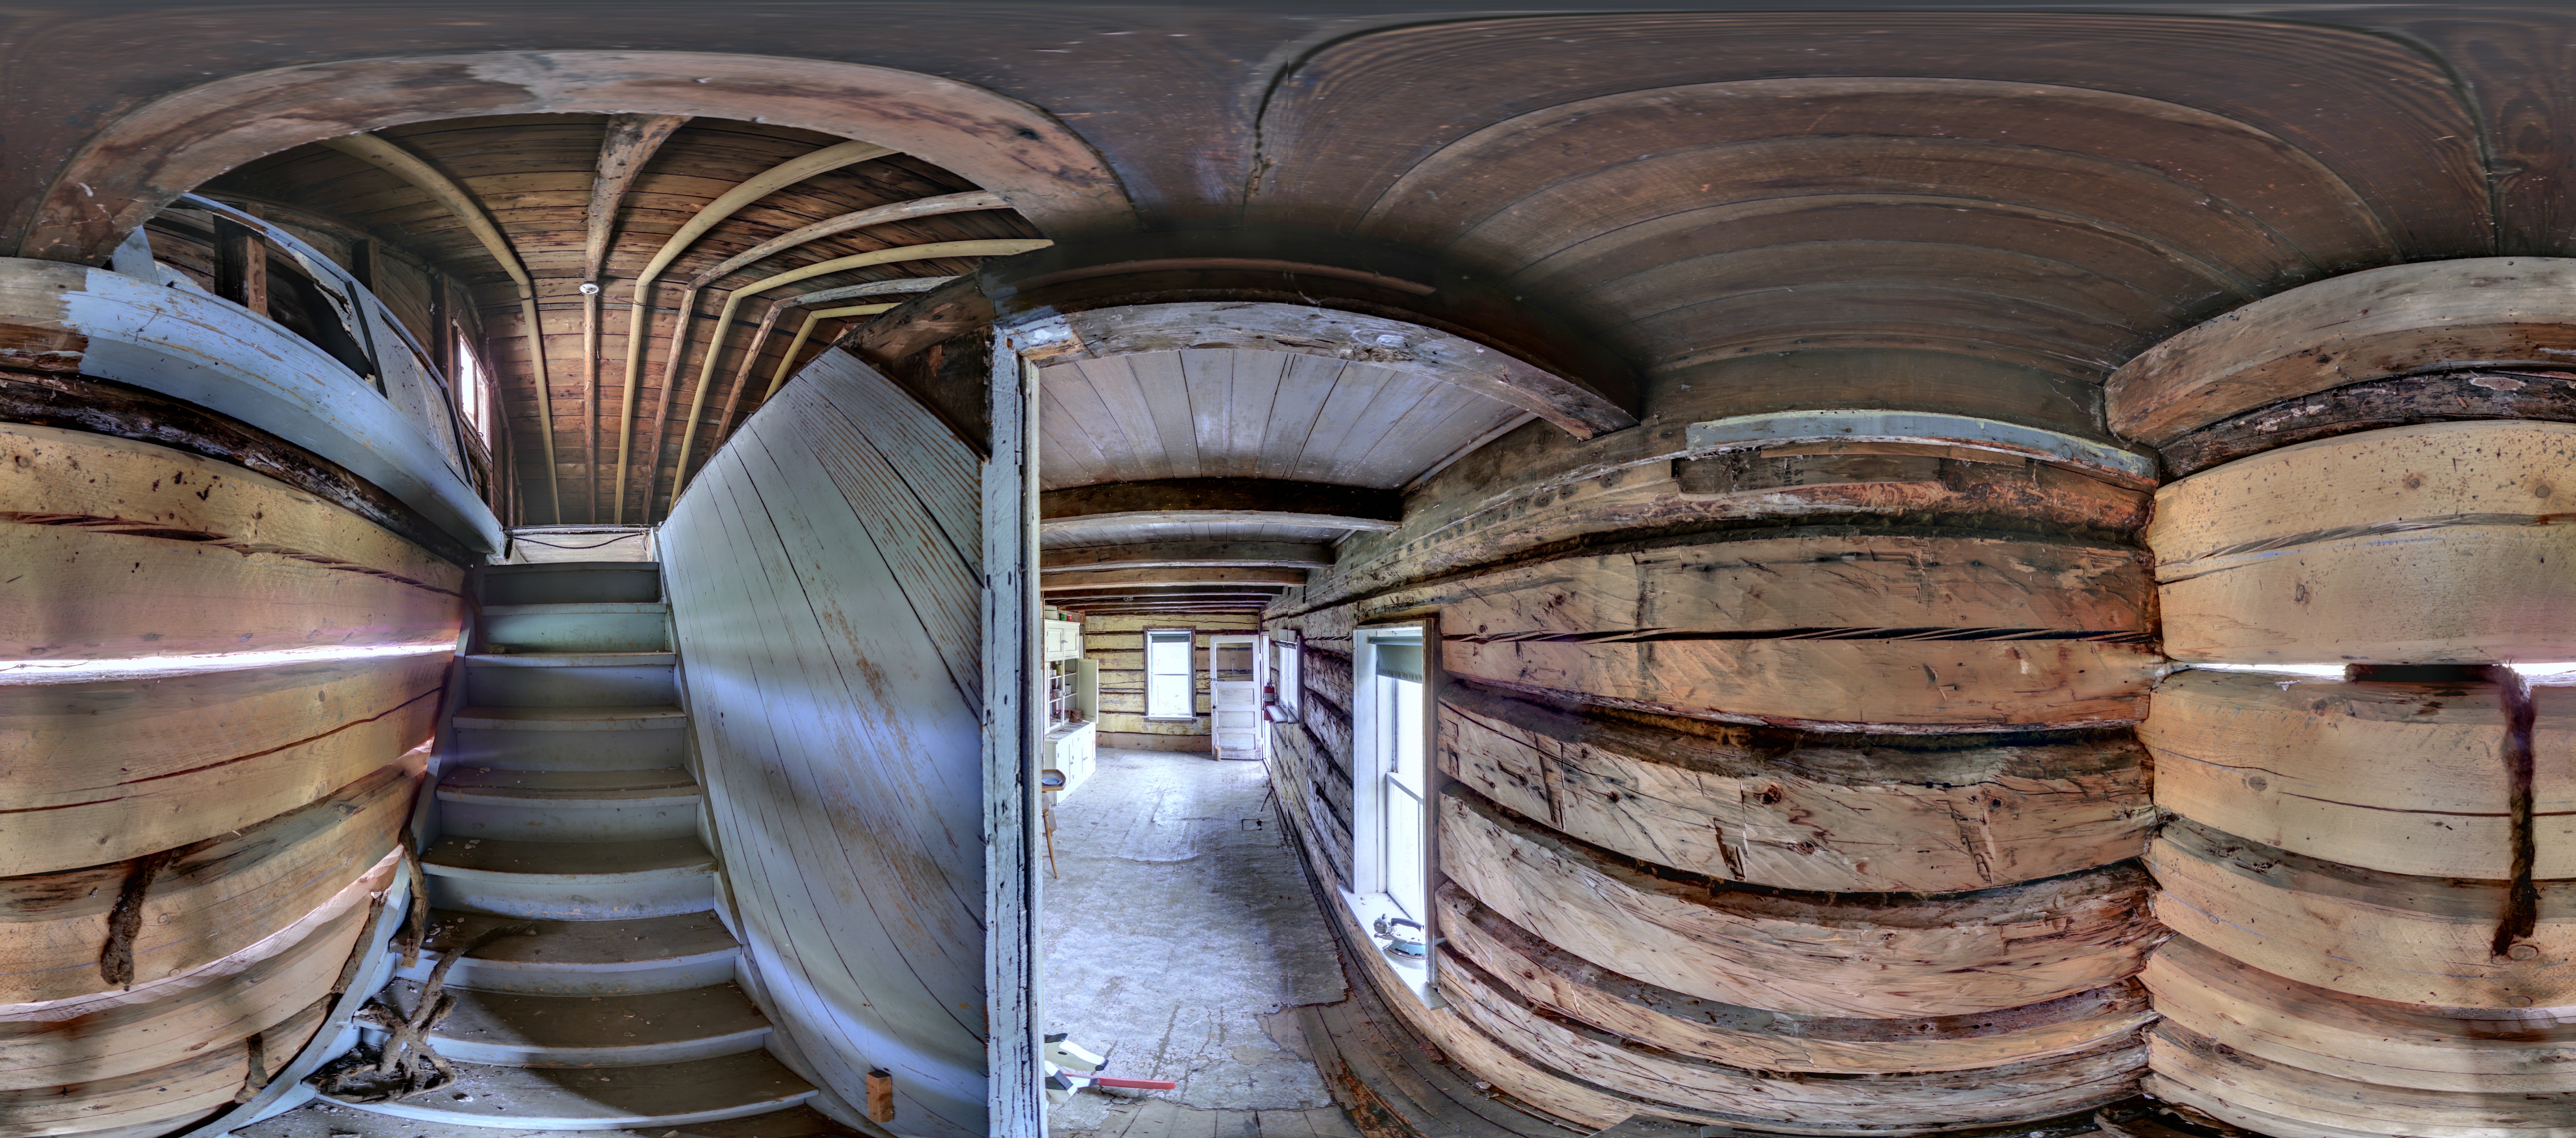 Panoramic image of scanning location 9 of the interior of the Foreman's House at Bar U Ranch